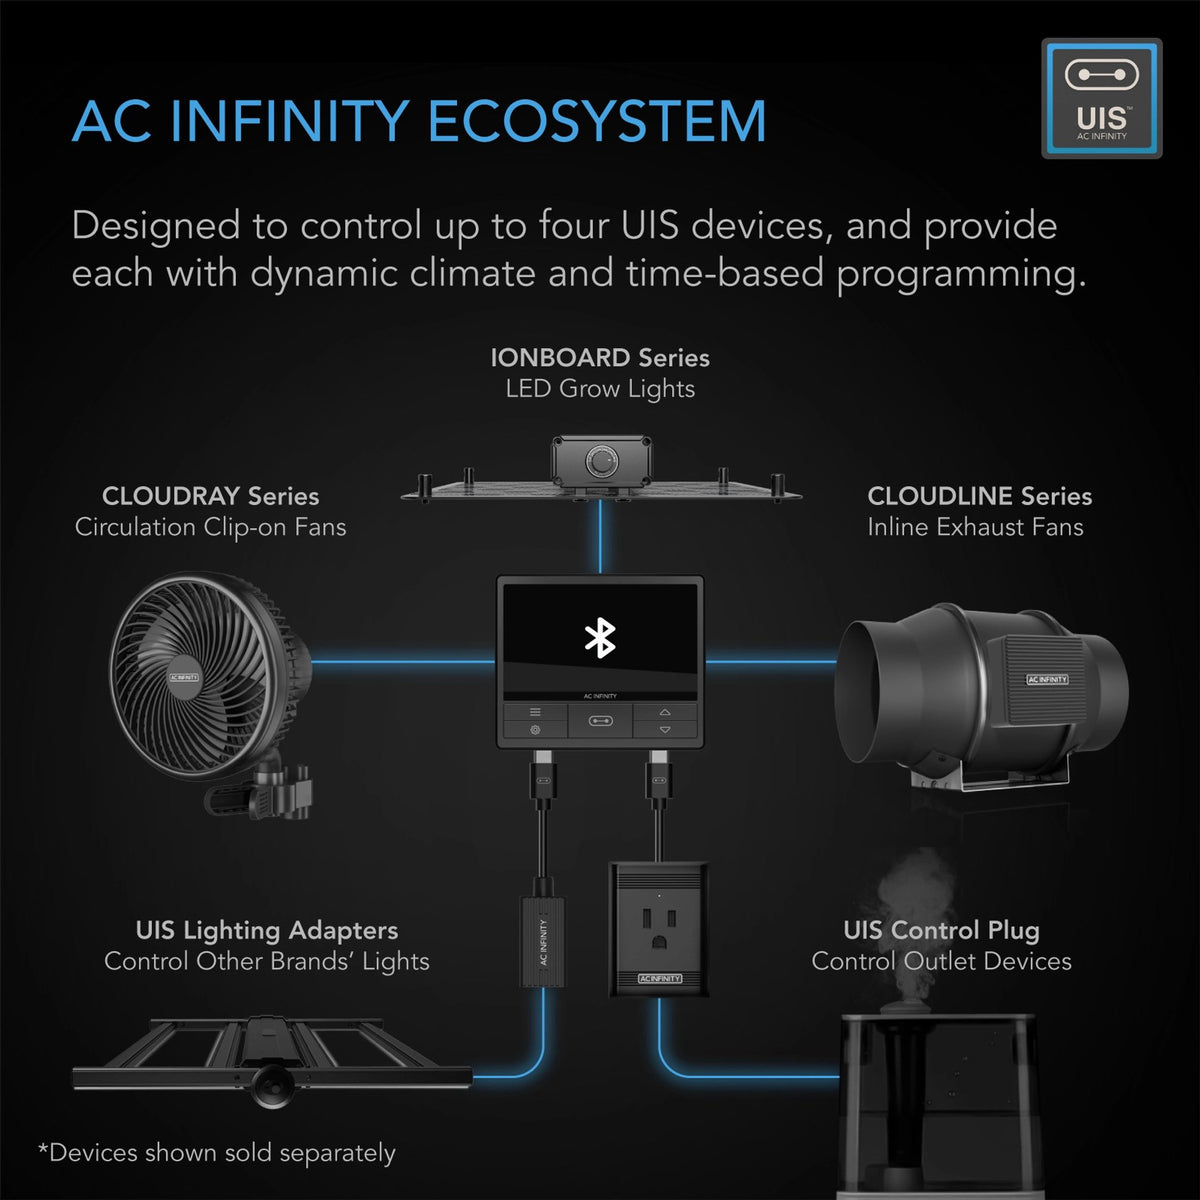 AC Infinity ECO System compatible UIS